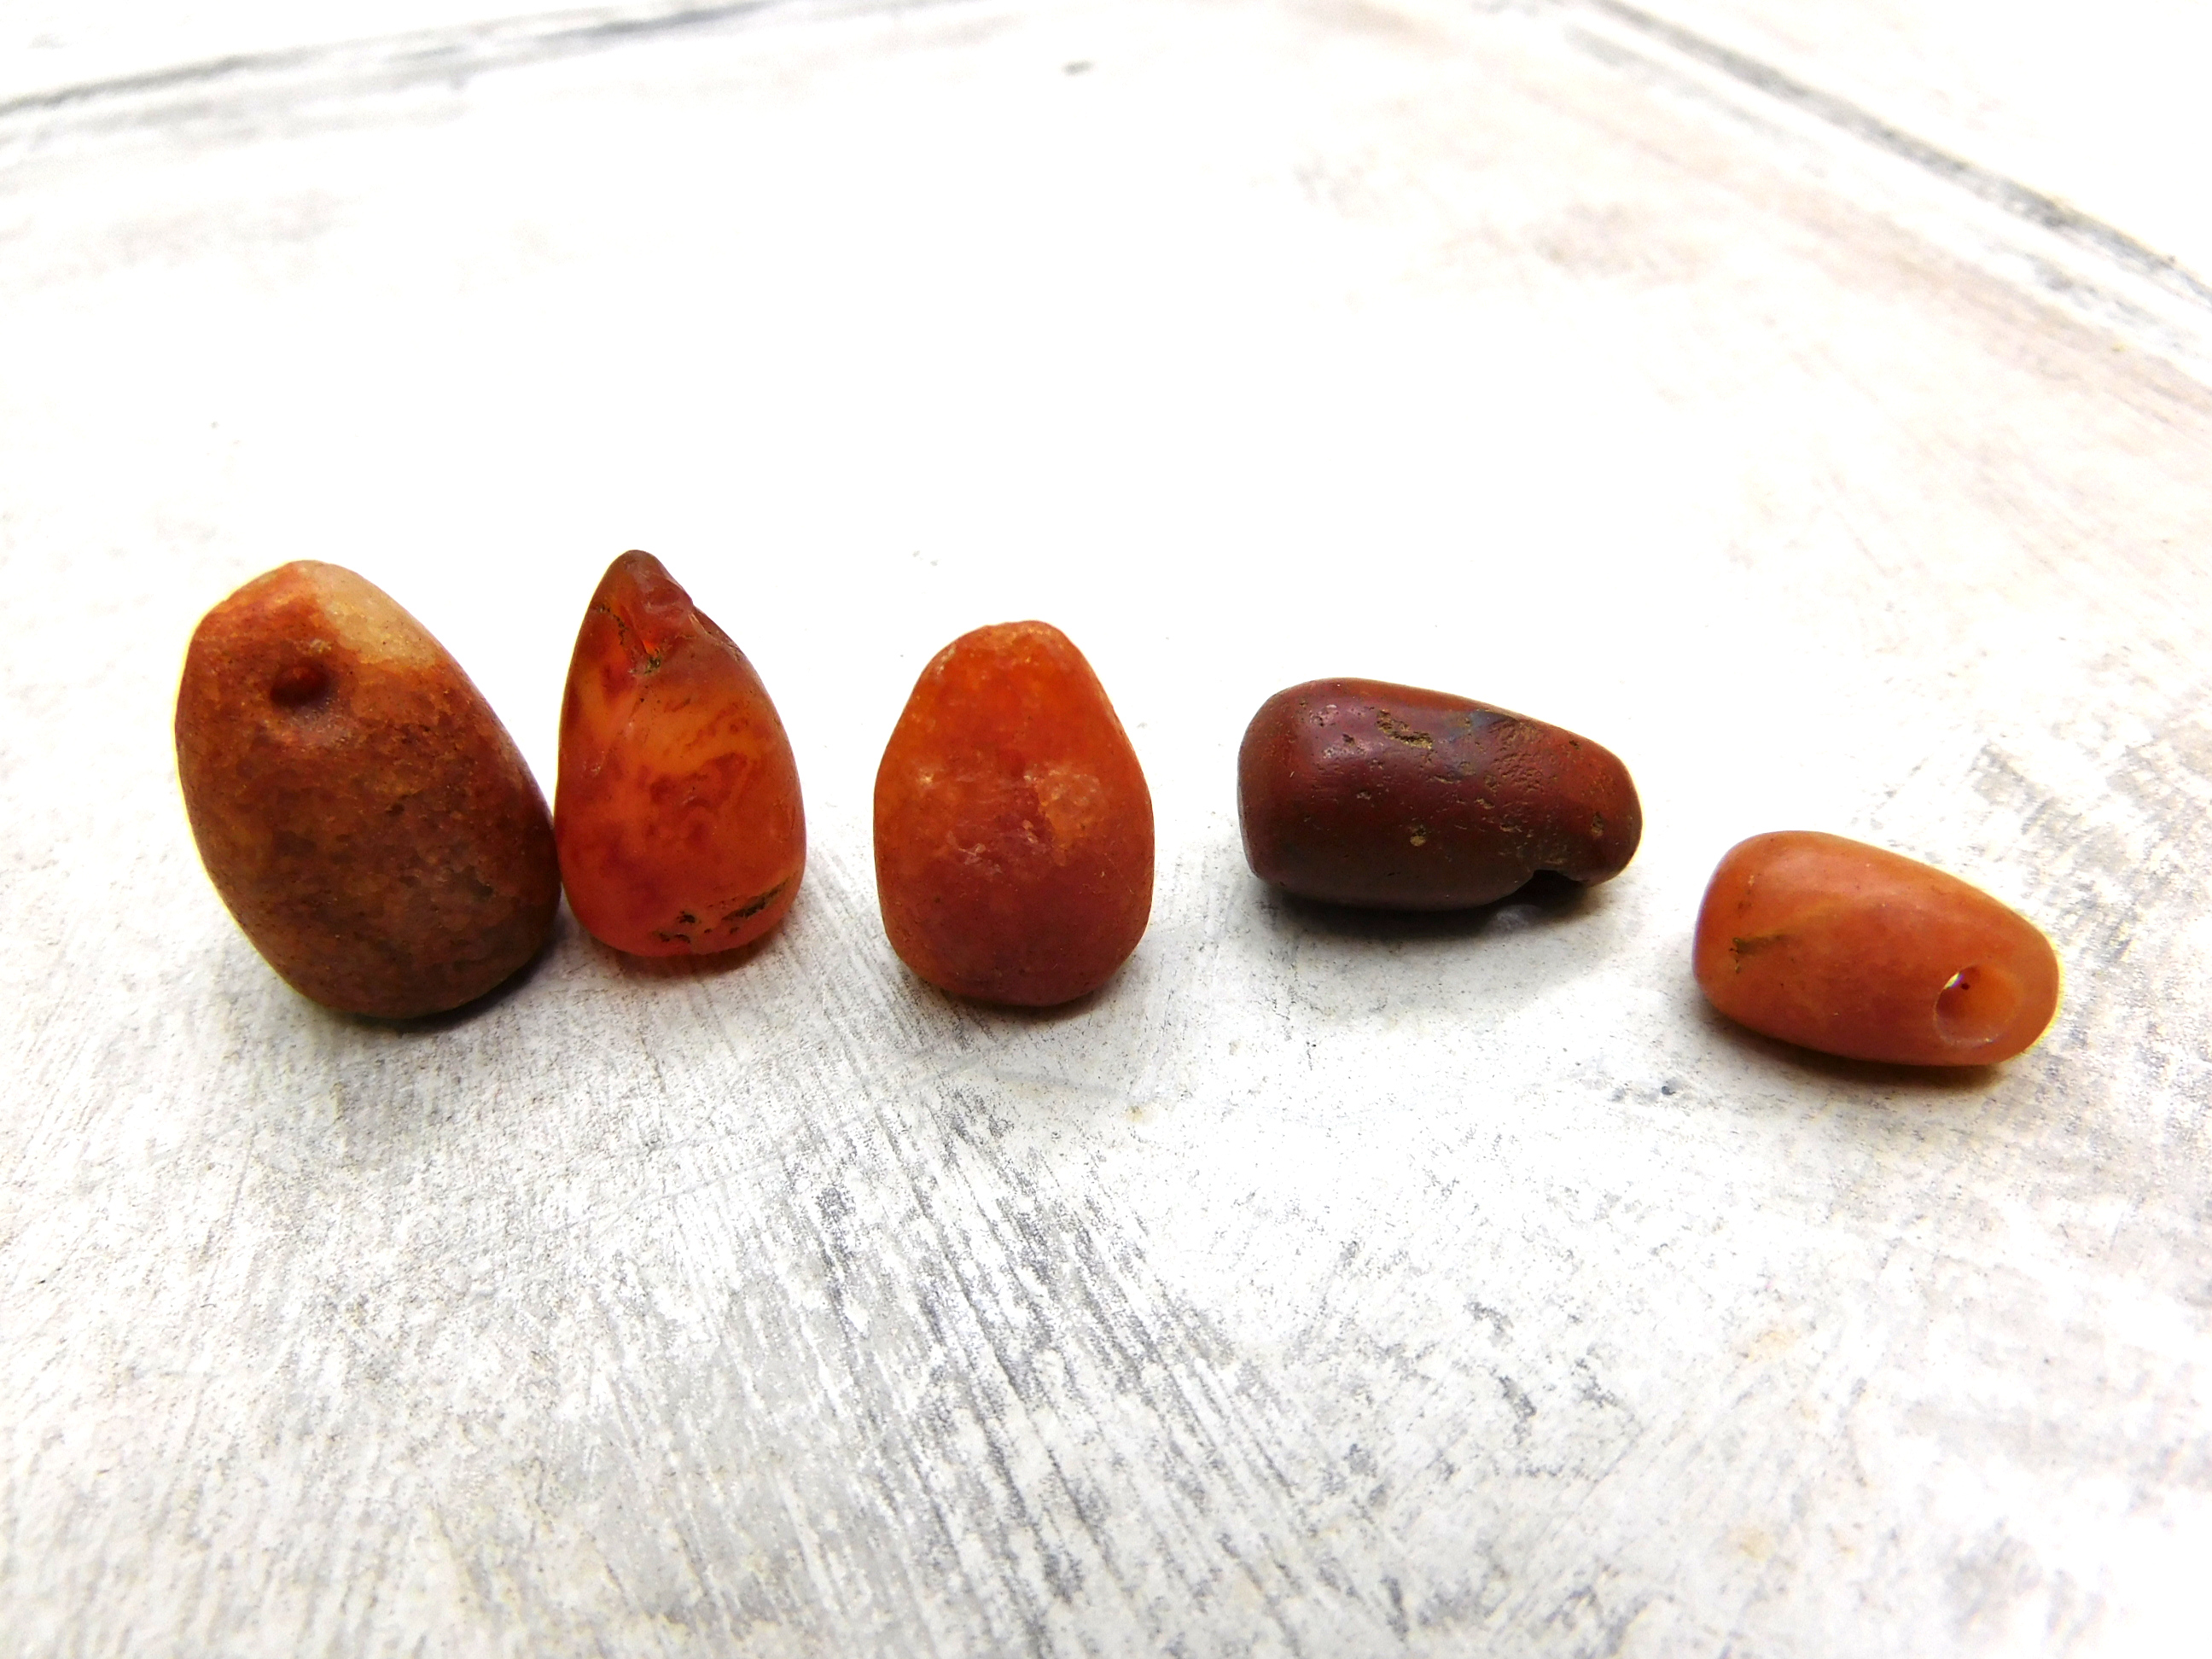 5 pendant beads from Mali - rare and old - desert stones